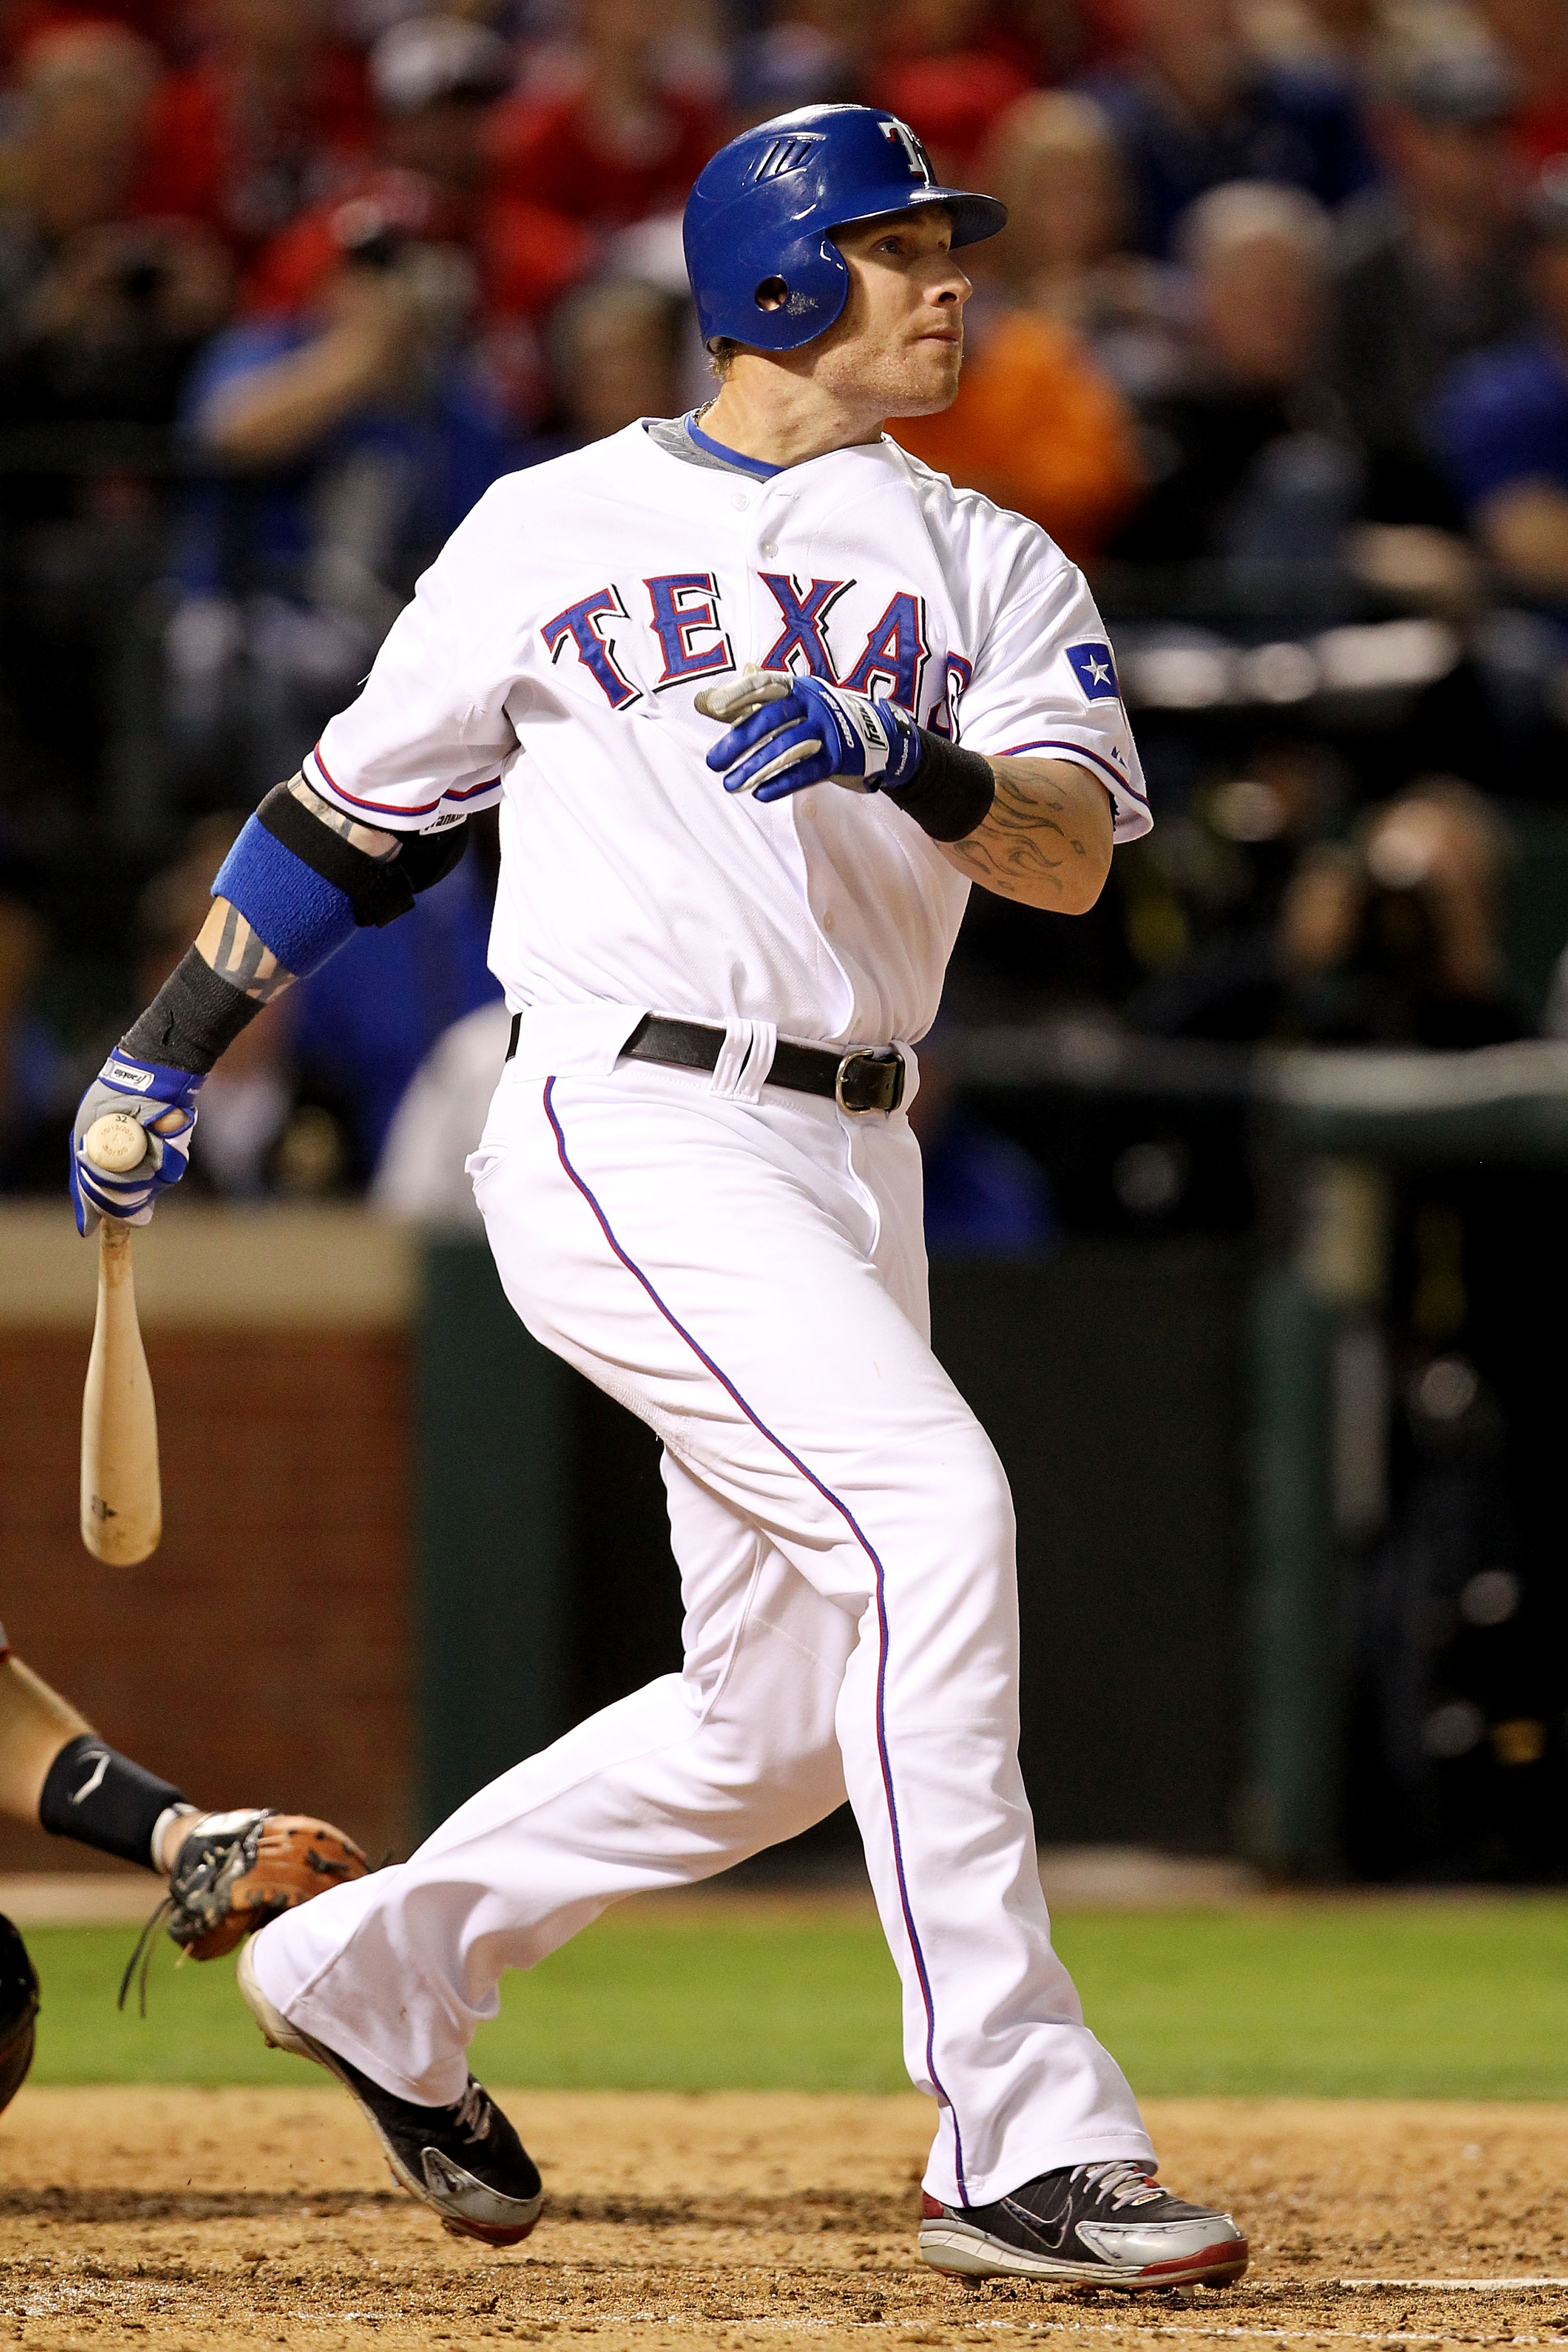 ARLINGTON, TX - OCTOBER 30:  Josh Hamilton #32 of the Texas Rangers hits a solo home run in the bottom of the fifht inning against the San Francisco Giants in Game Three of the 2010 MLB World Series at Rangers Ballpark in Arlington on October 30, 2010 in